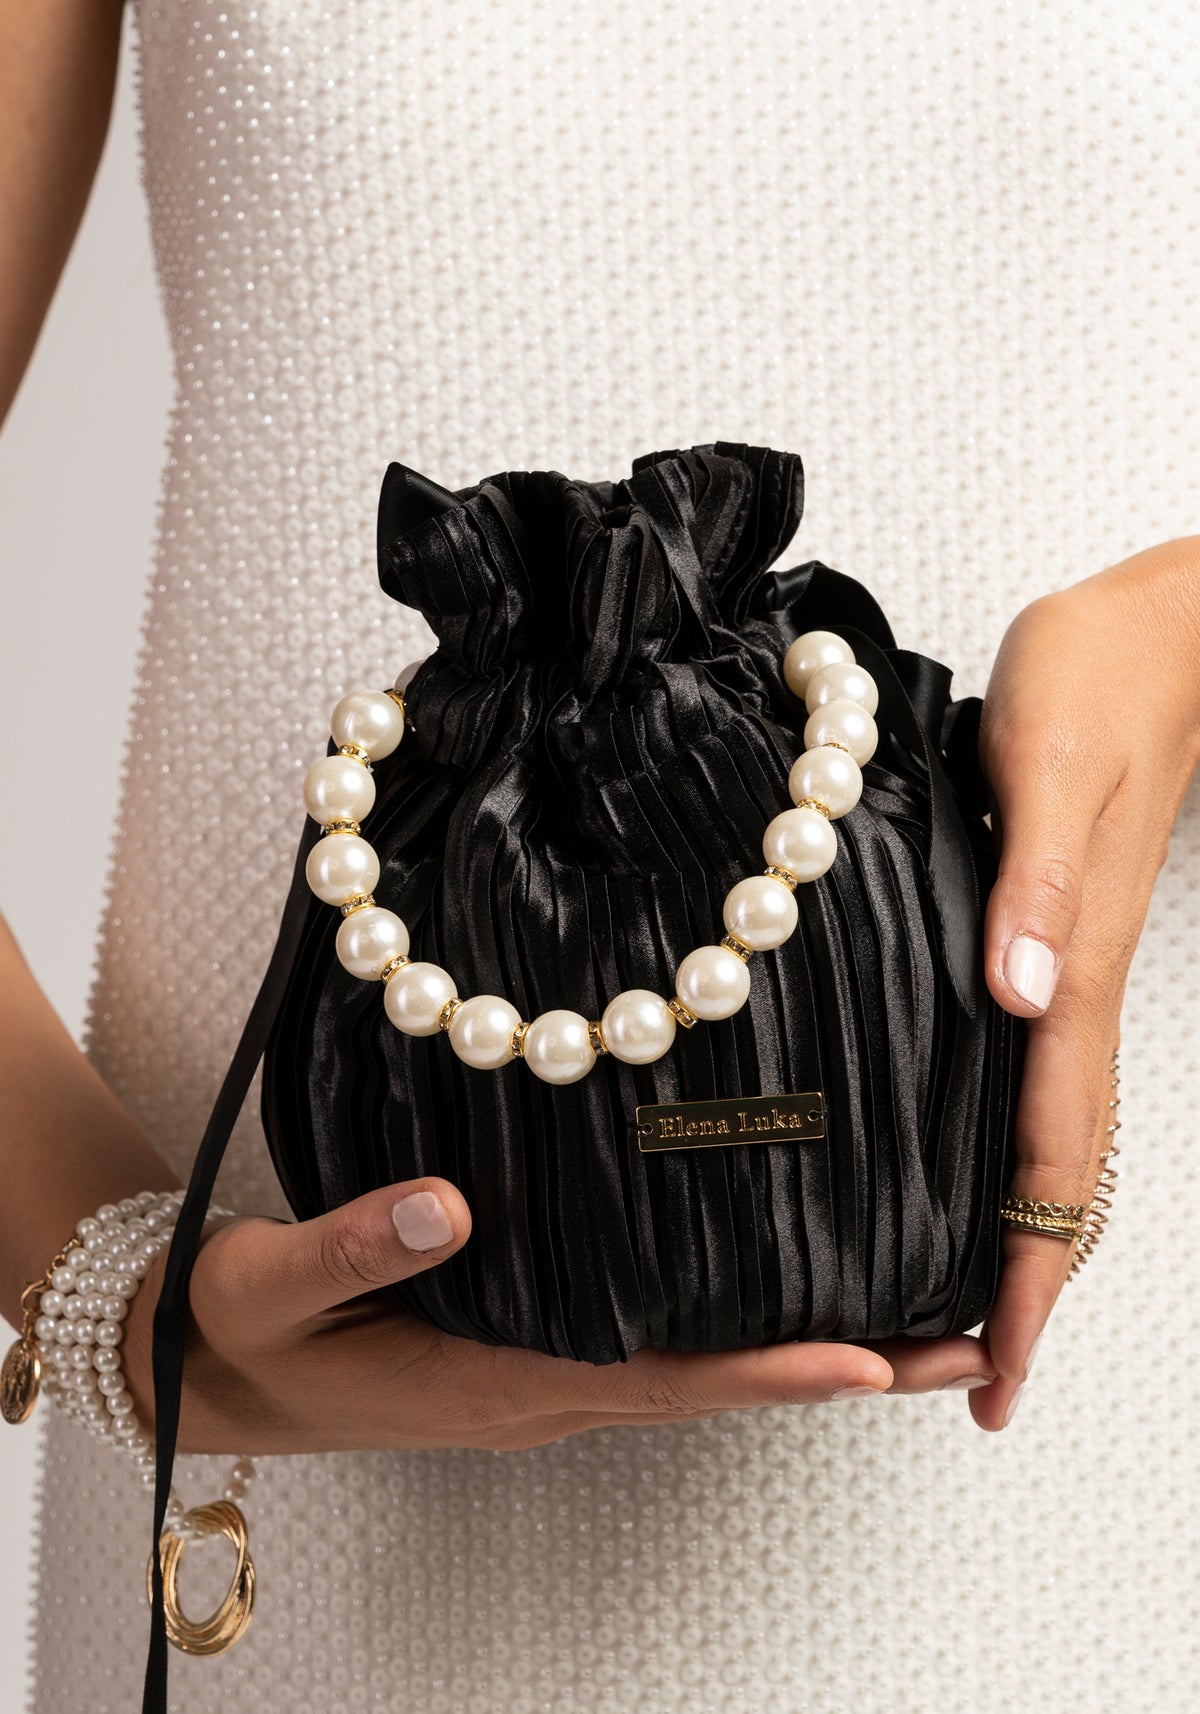 Luxury black pouch handbag with pearls